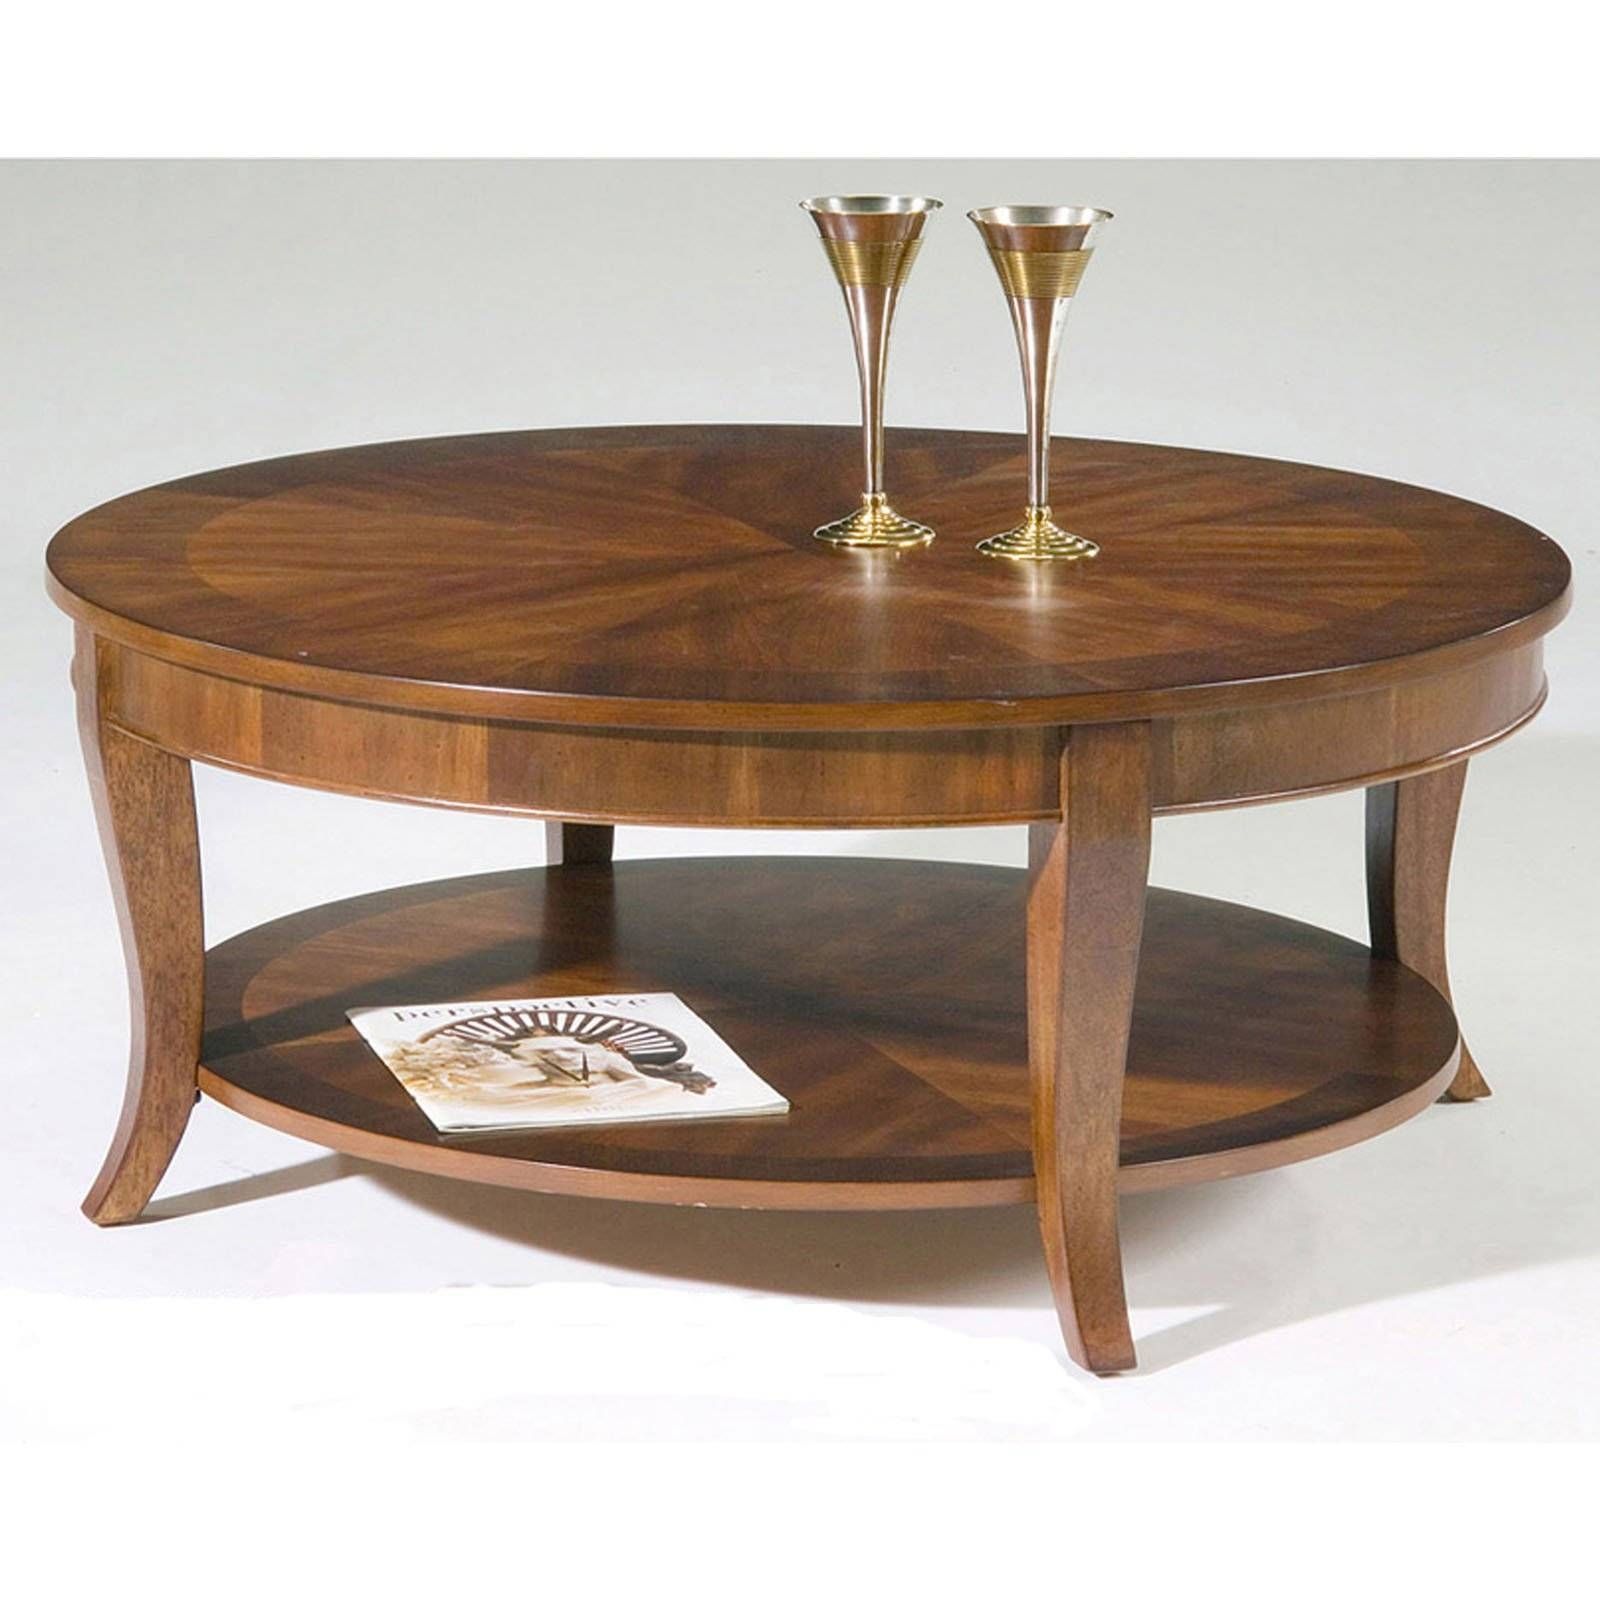 Hammary Promenade Round Coffee Table – Coffee Tables At Hayneedle Inside Circular Coffee Tables (View 3 of 30)